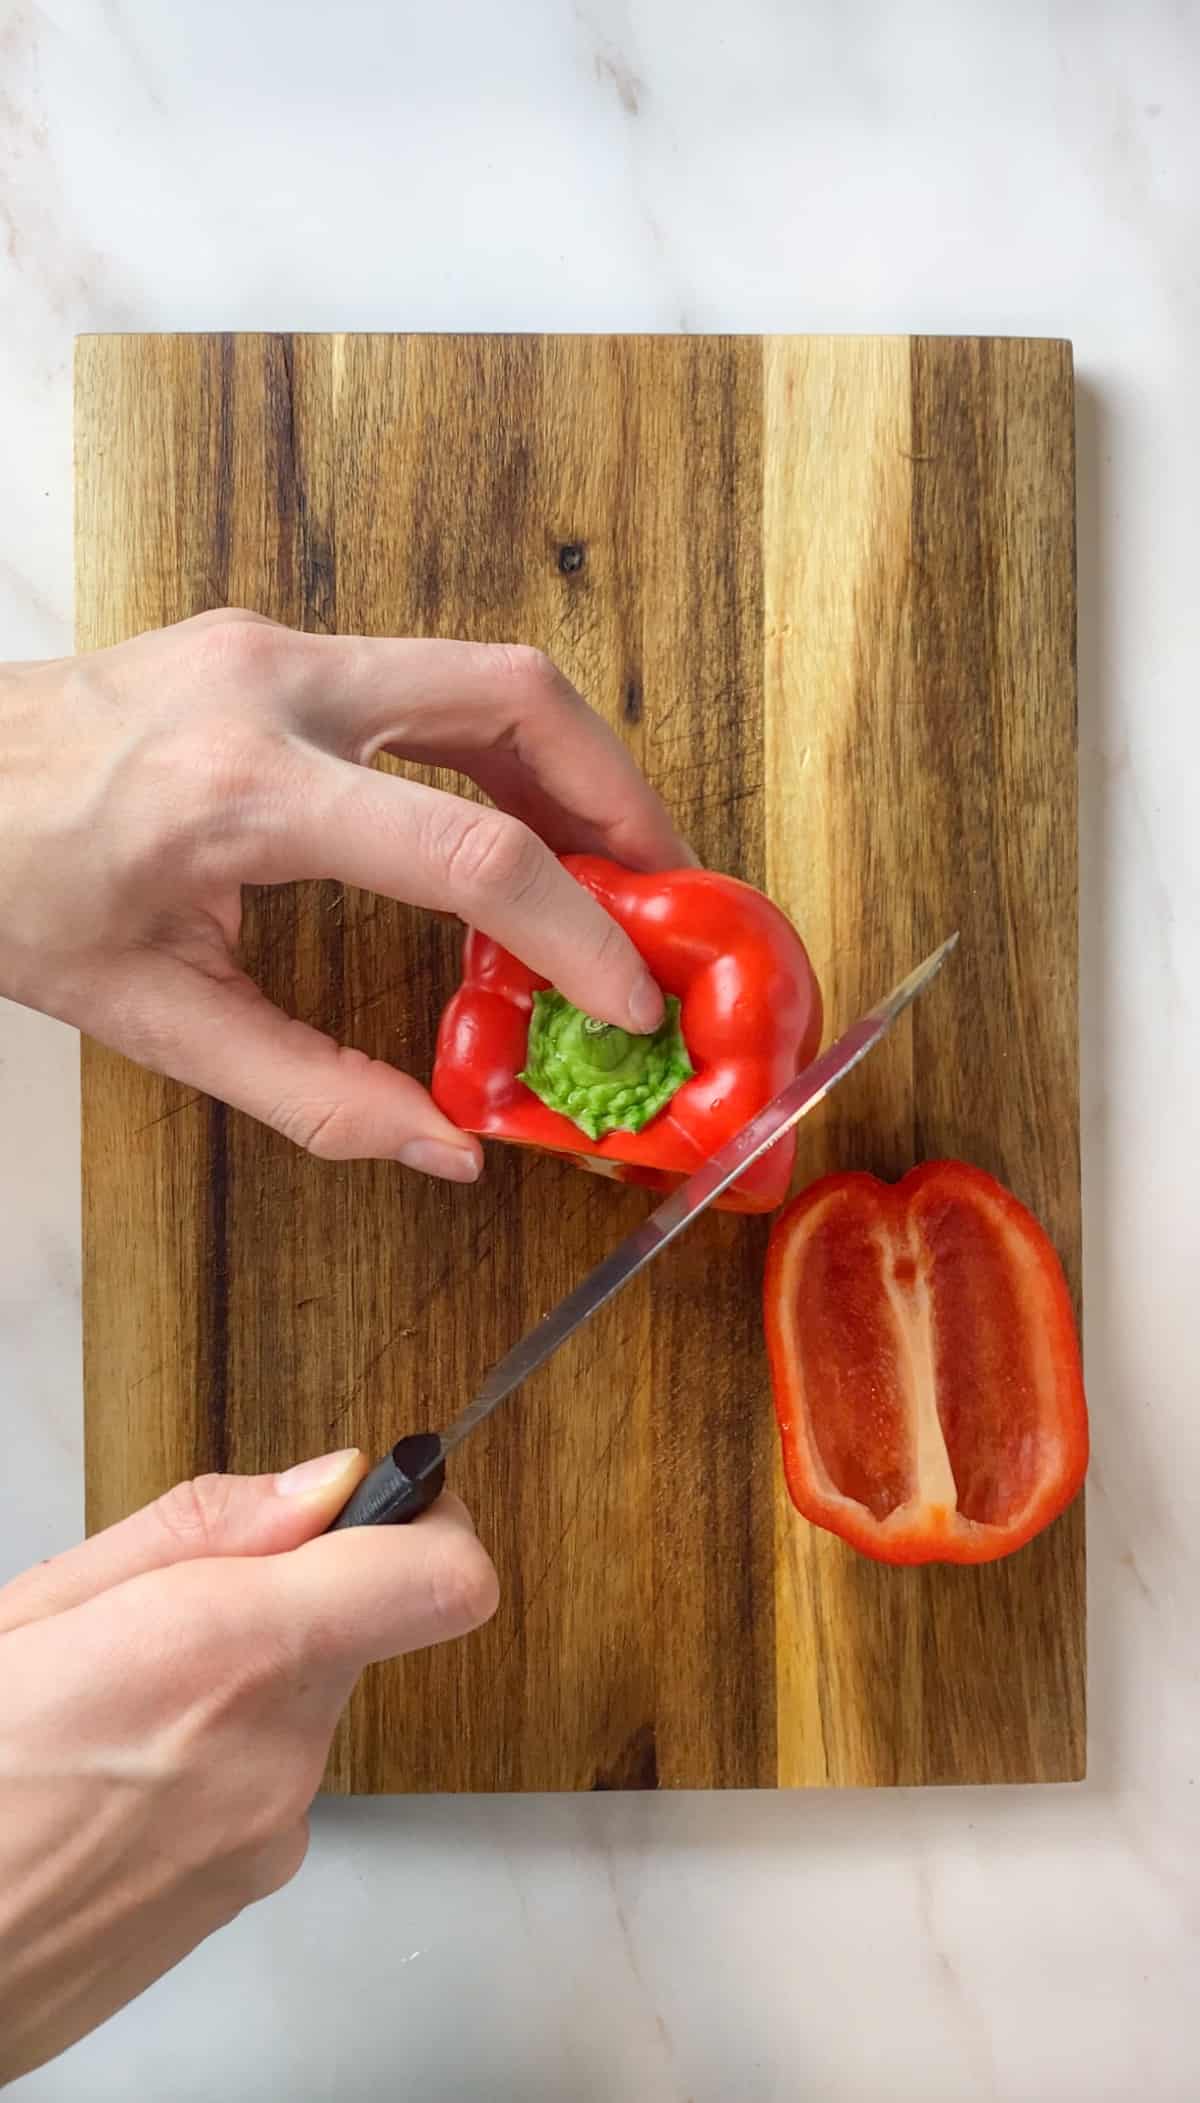 Slicing the sides off of a red bell pepper with a knife on a wooden cutting board.